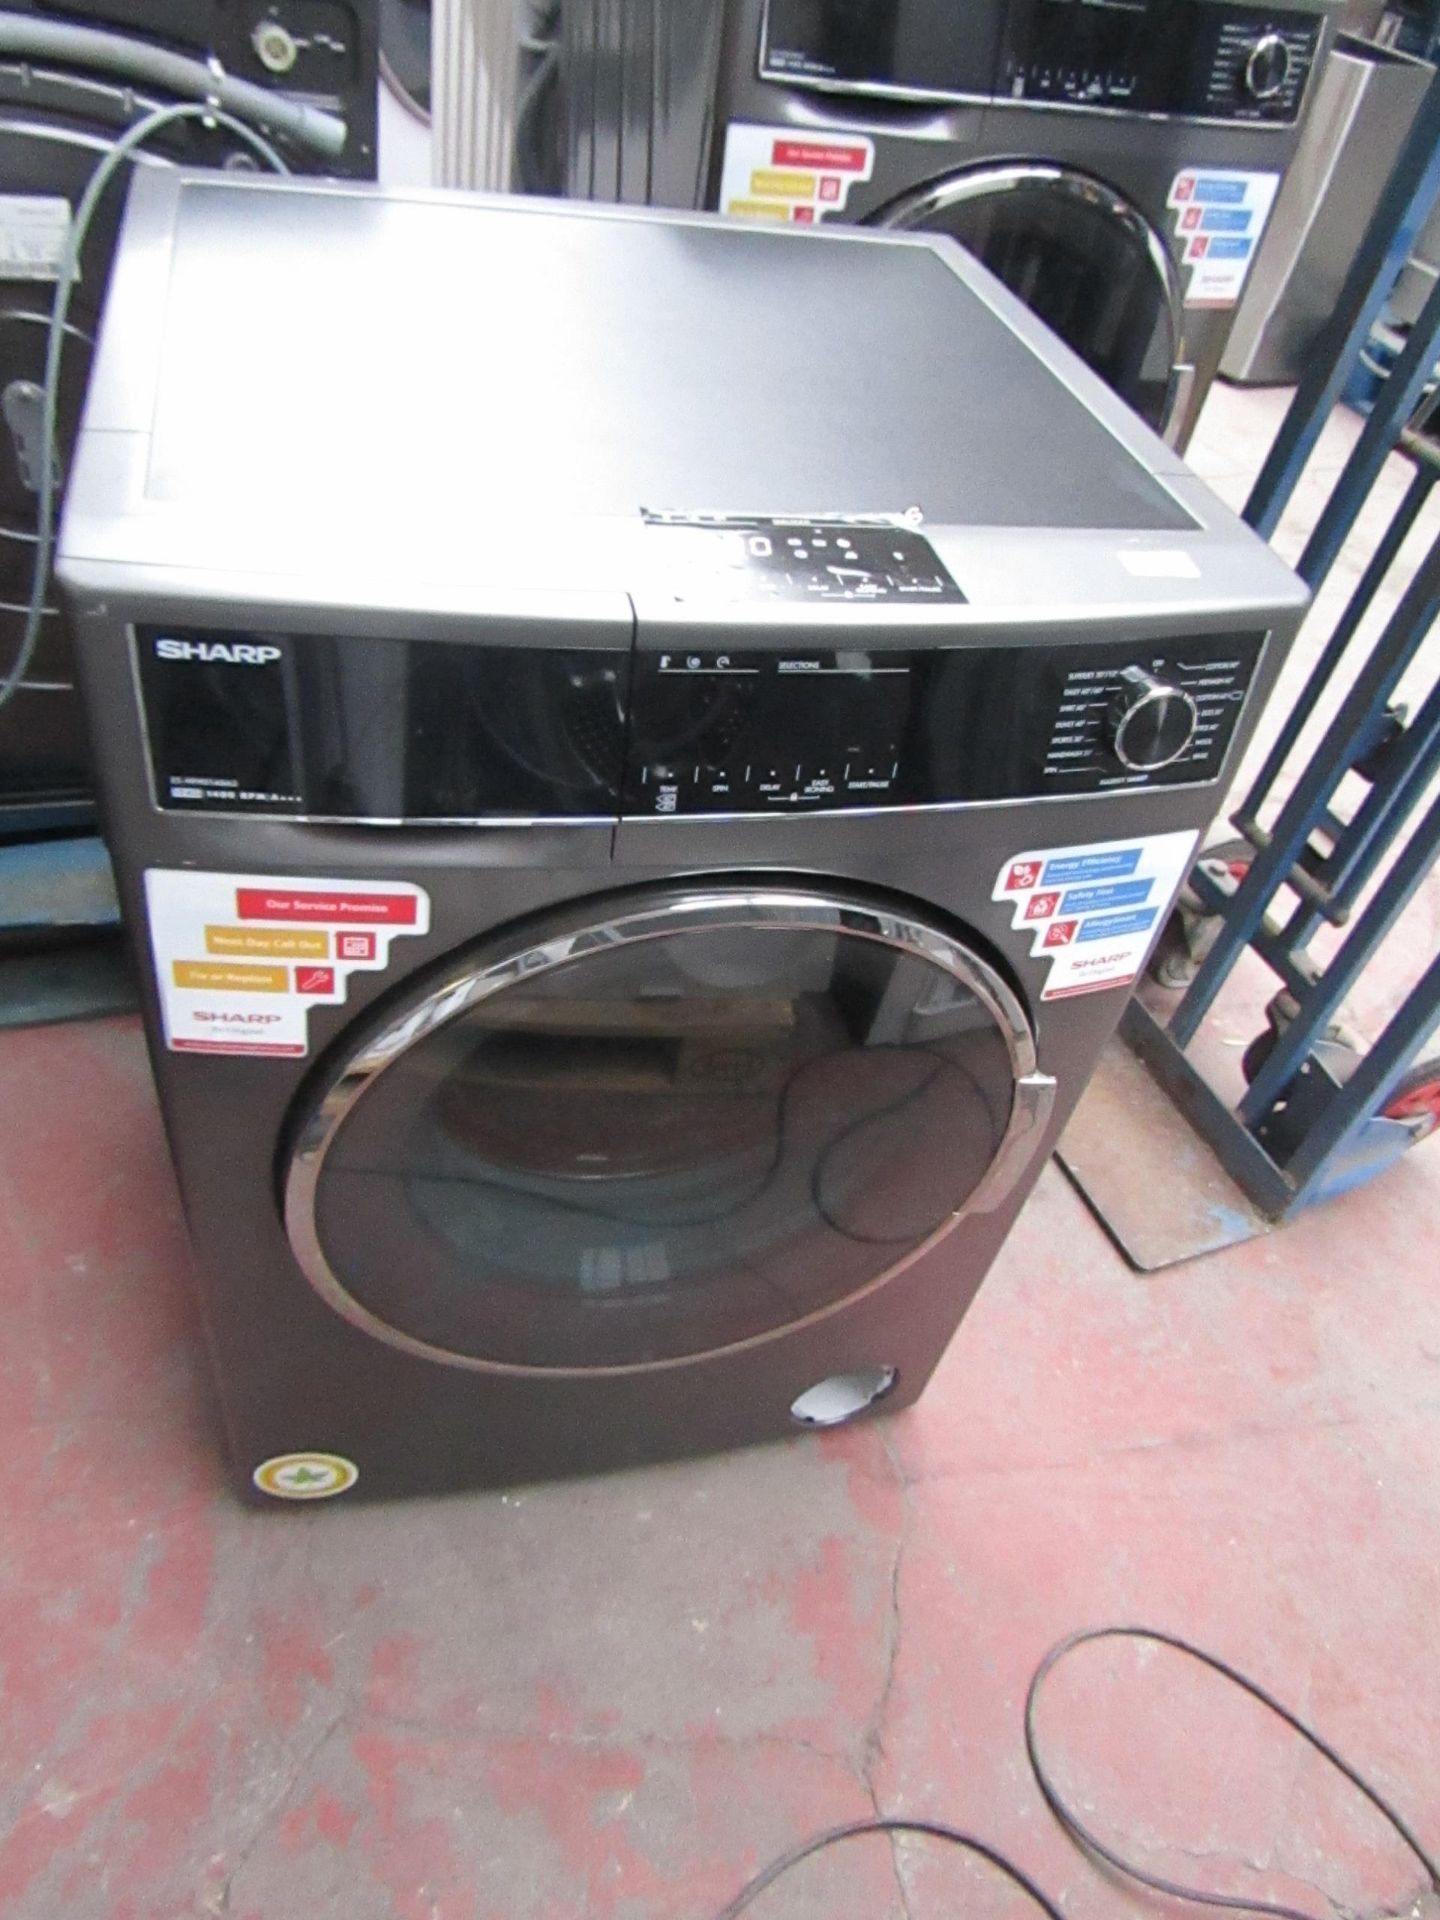 Sharp 1400RPM 10Kg washing machine, seller has checked these items and have informed us they are